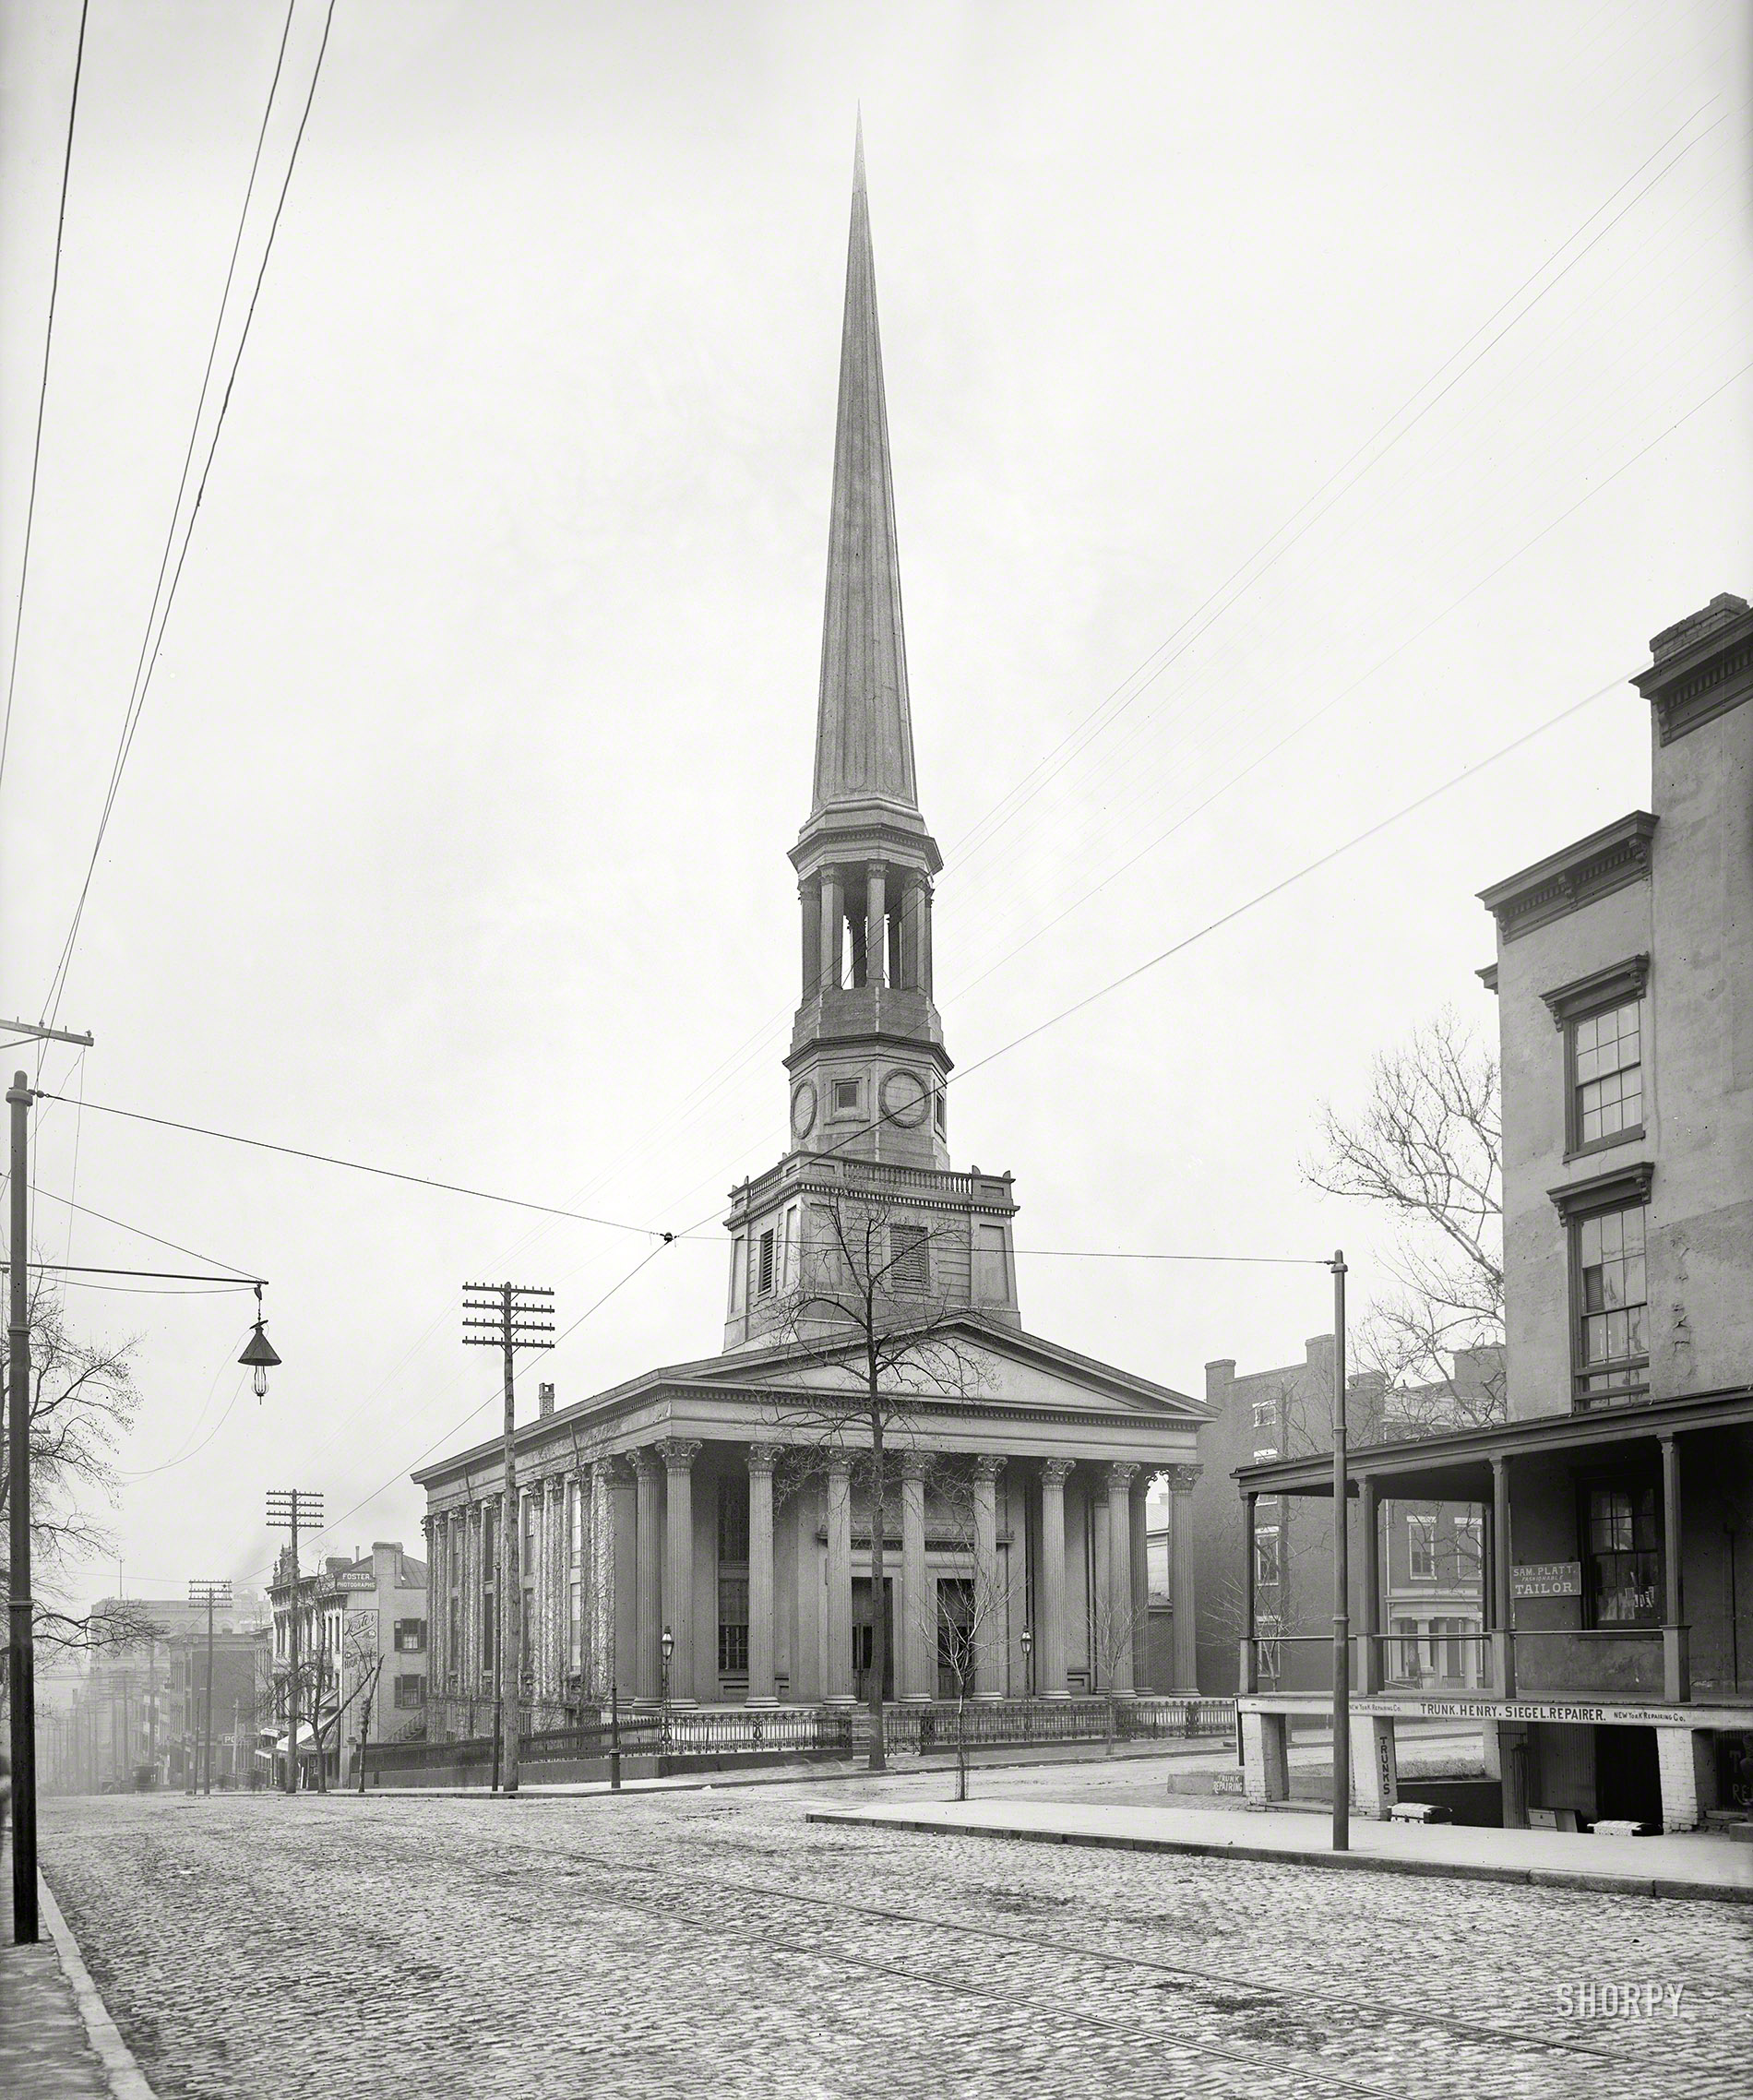 Richmond, Va., circa 1900. "St. Paul's Episcopal Church, Ninth & Grace Streets." The so-called "Cathedral of the Confederacy," attended by Robert E. Lee and Jefferson Davis. 8x10 glass negative by William Henry Jackson. View full size.